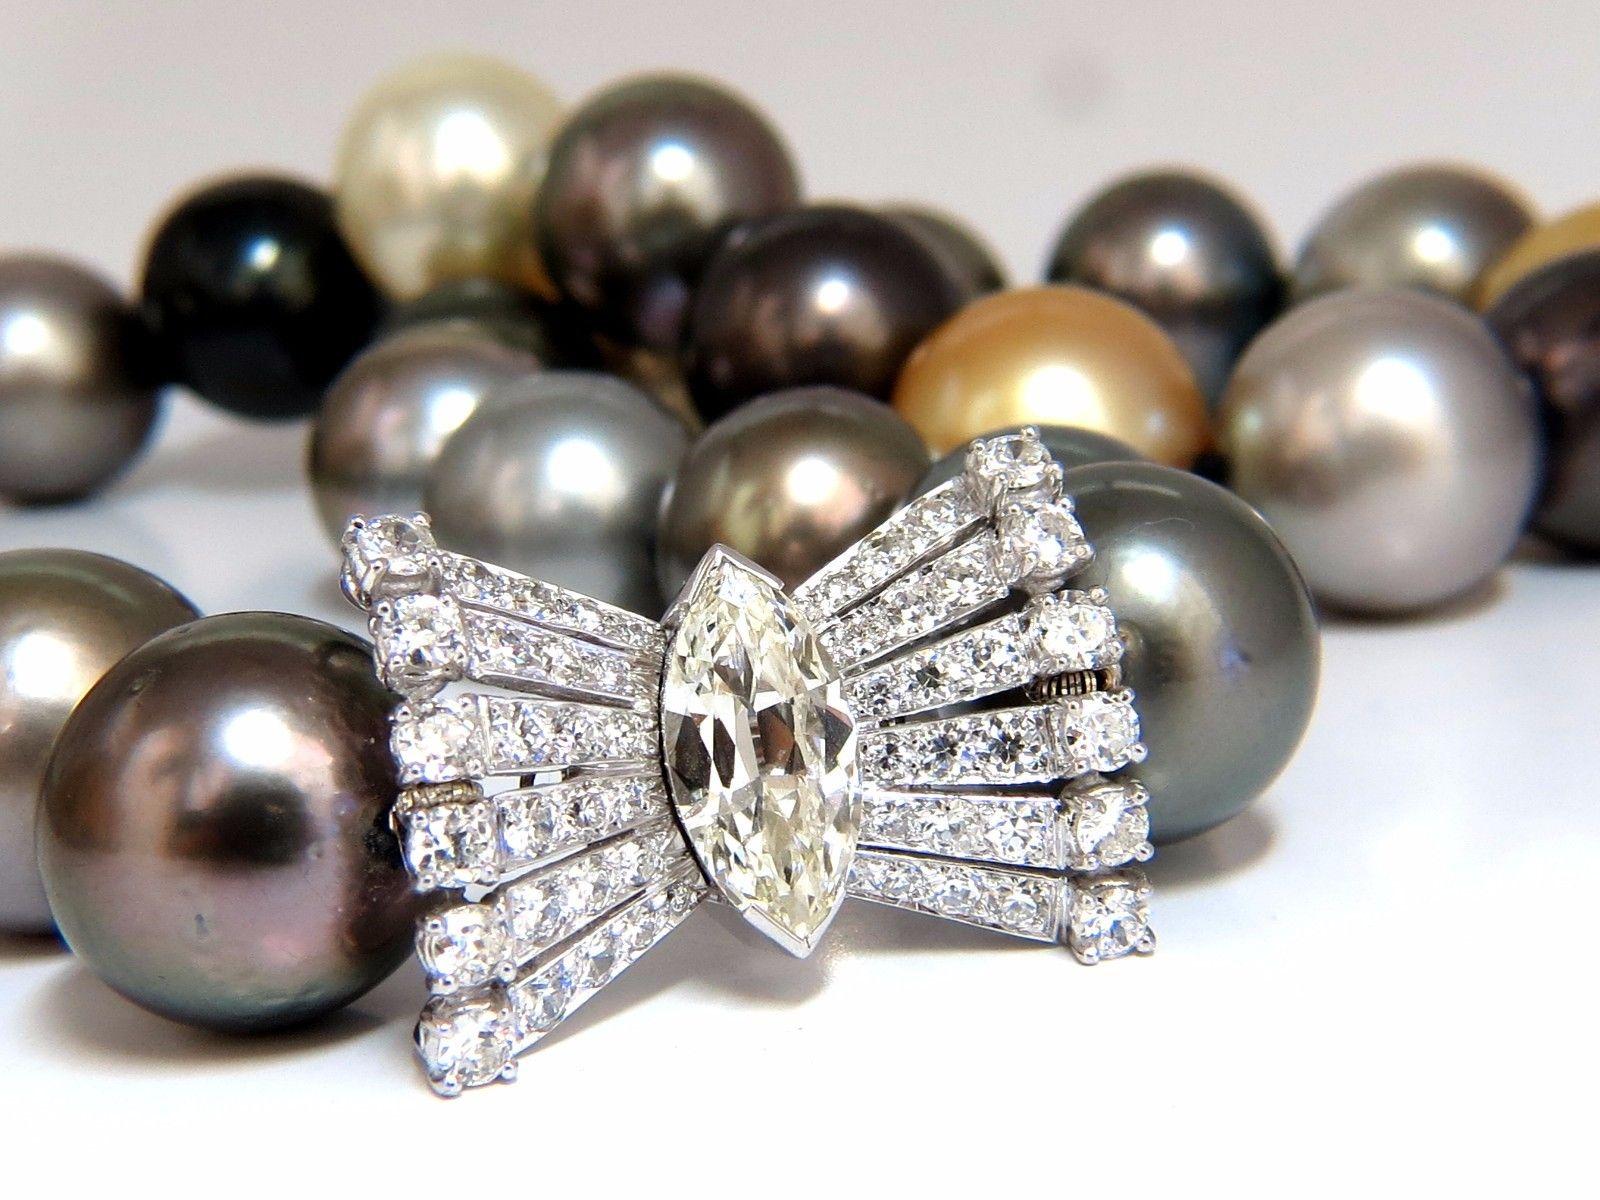 GIA certified Natural Tahitian Pearl Necklace 4.00ct. diamonds 18Kt Magnificent Neuf - En vente à New York, NY